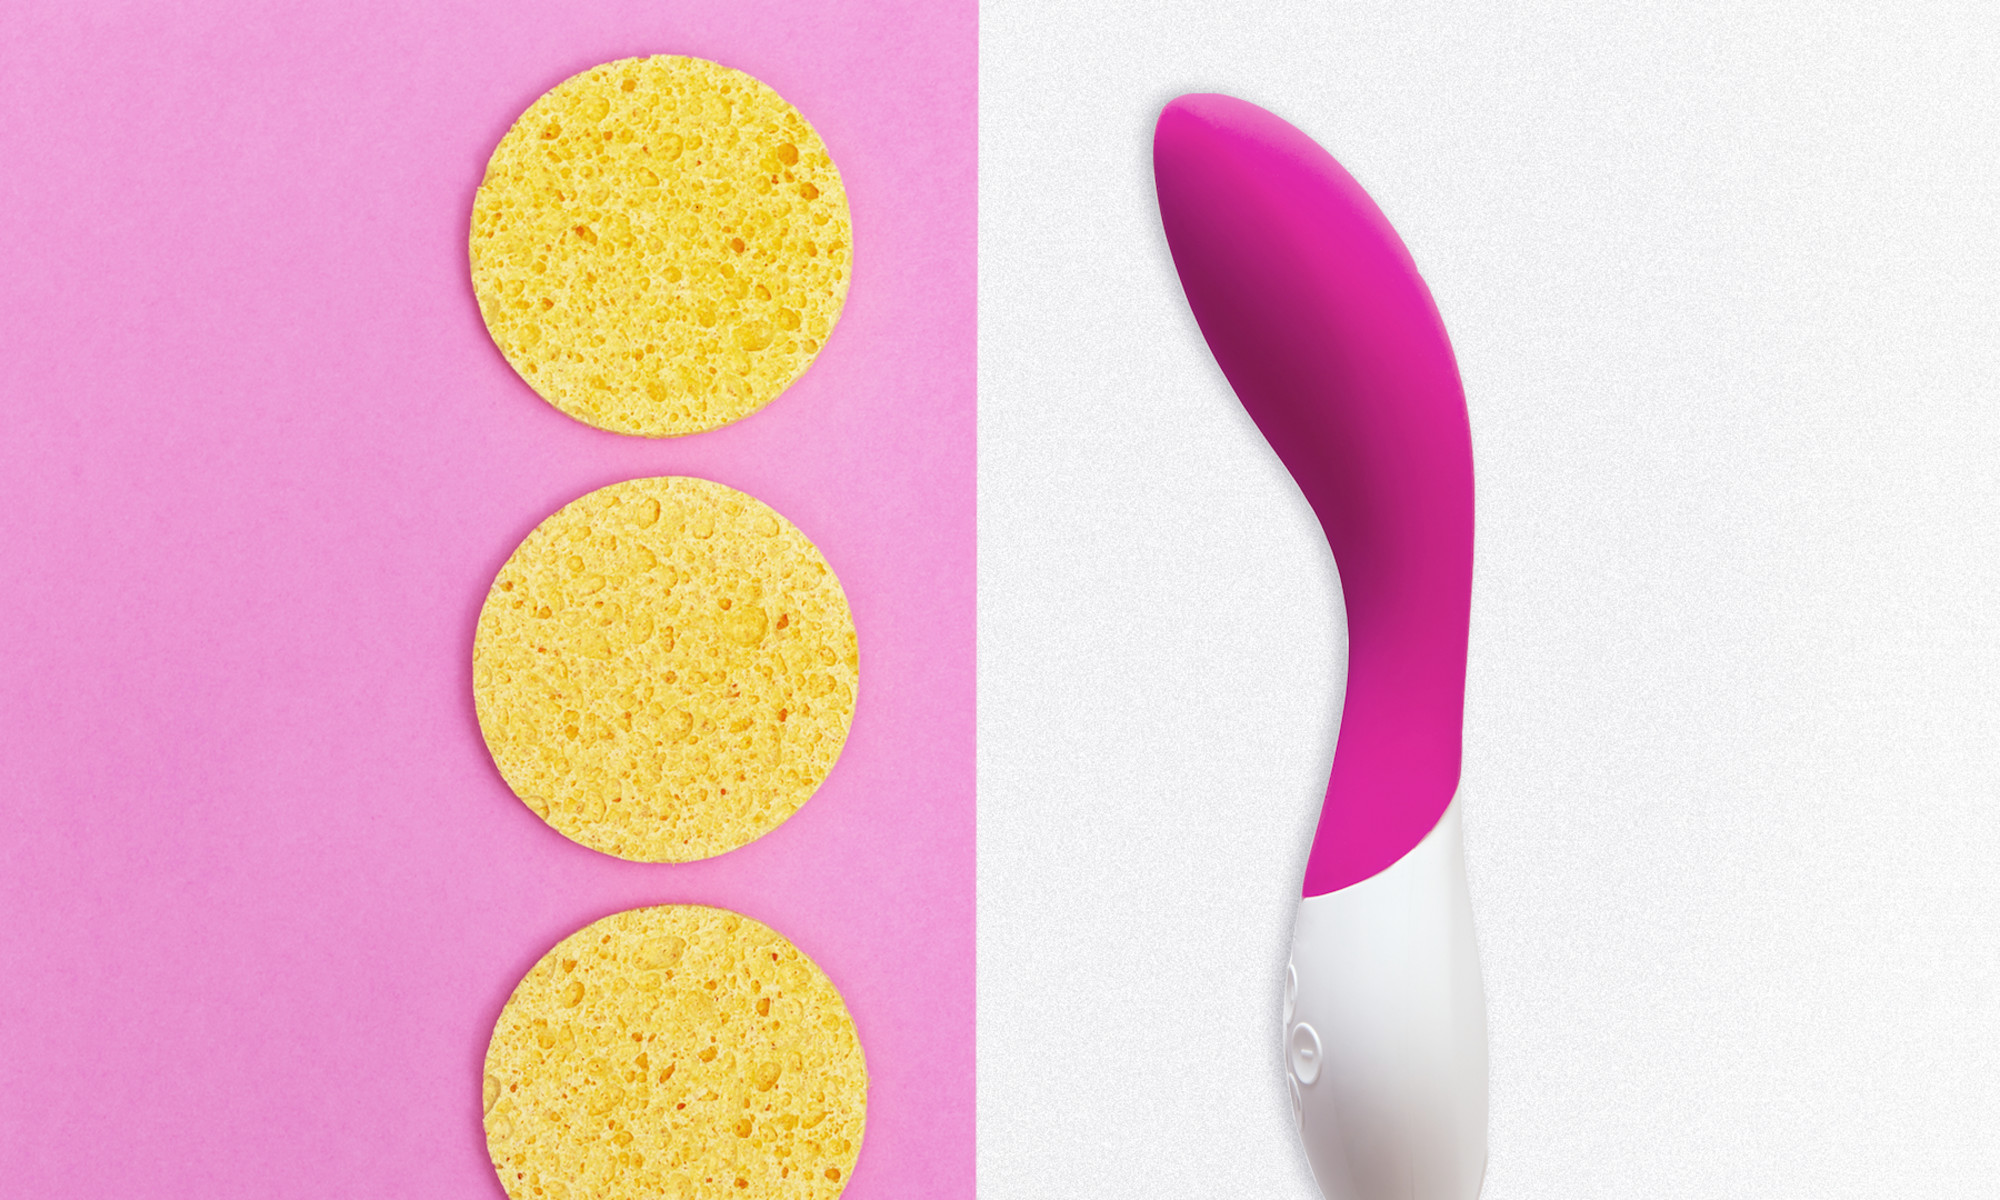 Exactly How To Clean and Care For Every Type Of Sex Toy mindbodygreen photo